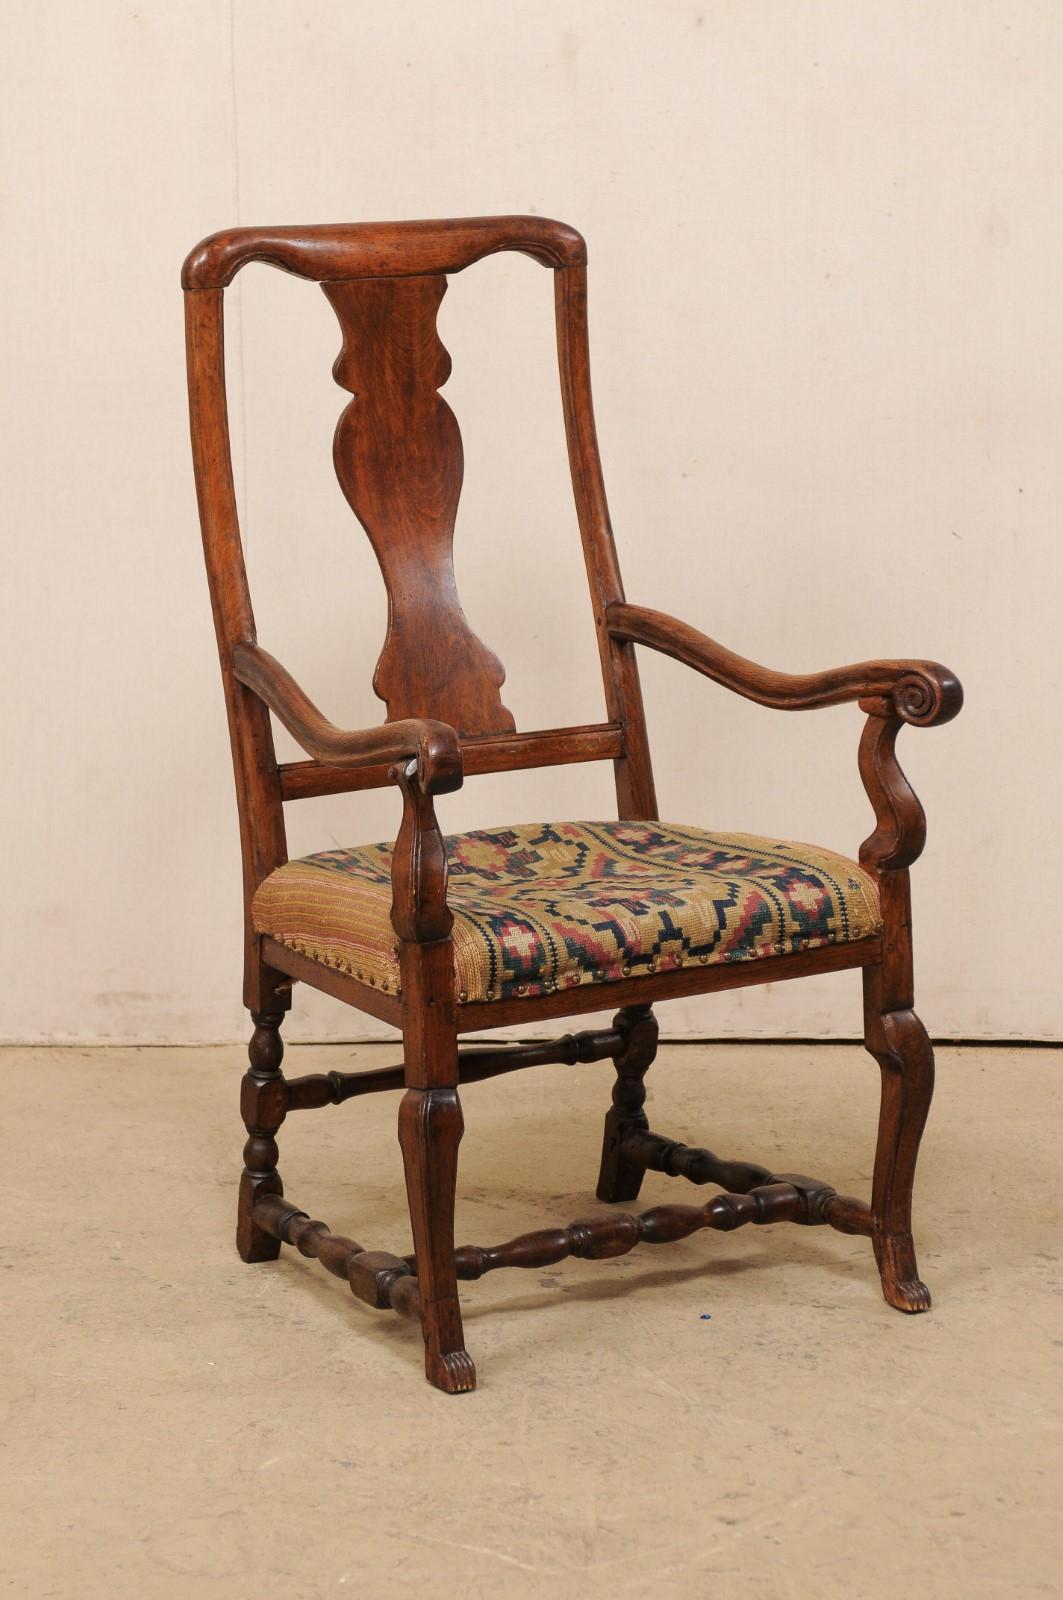 A Swedish carved-wood single arm chair with fabulous old woven fabric upholstery from the mid-18th century. This antique chair from Sweden, though period Rococo, is more subdued in it's carvings, more likely from the country than city. It is quite a